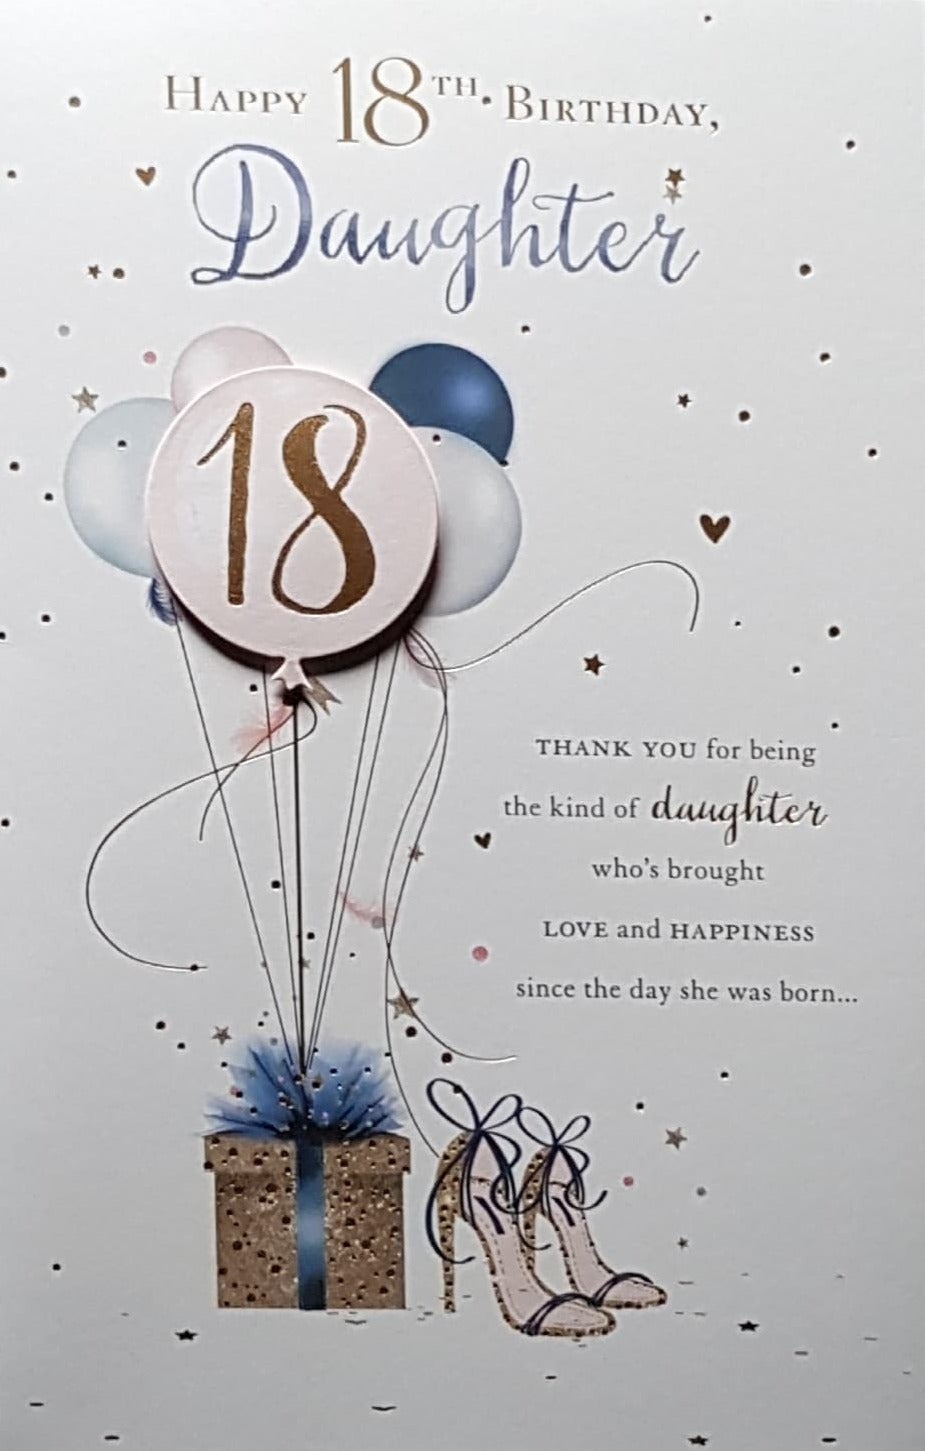 Age 18 Birthday Card - Daughter / Balloons Tied To A Gift Box & High Heels